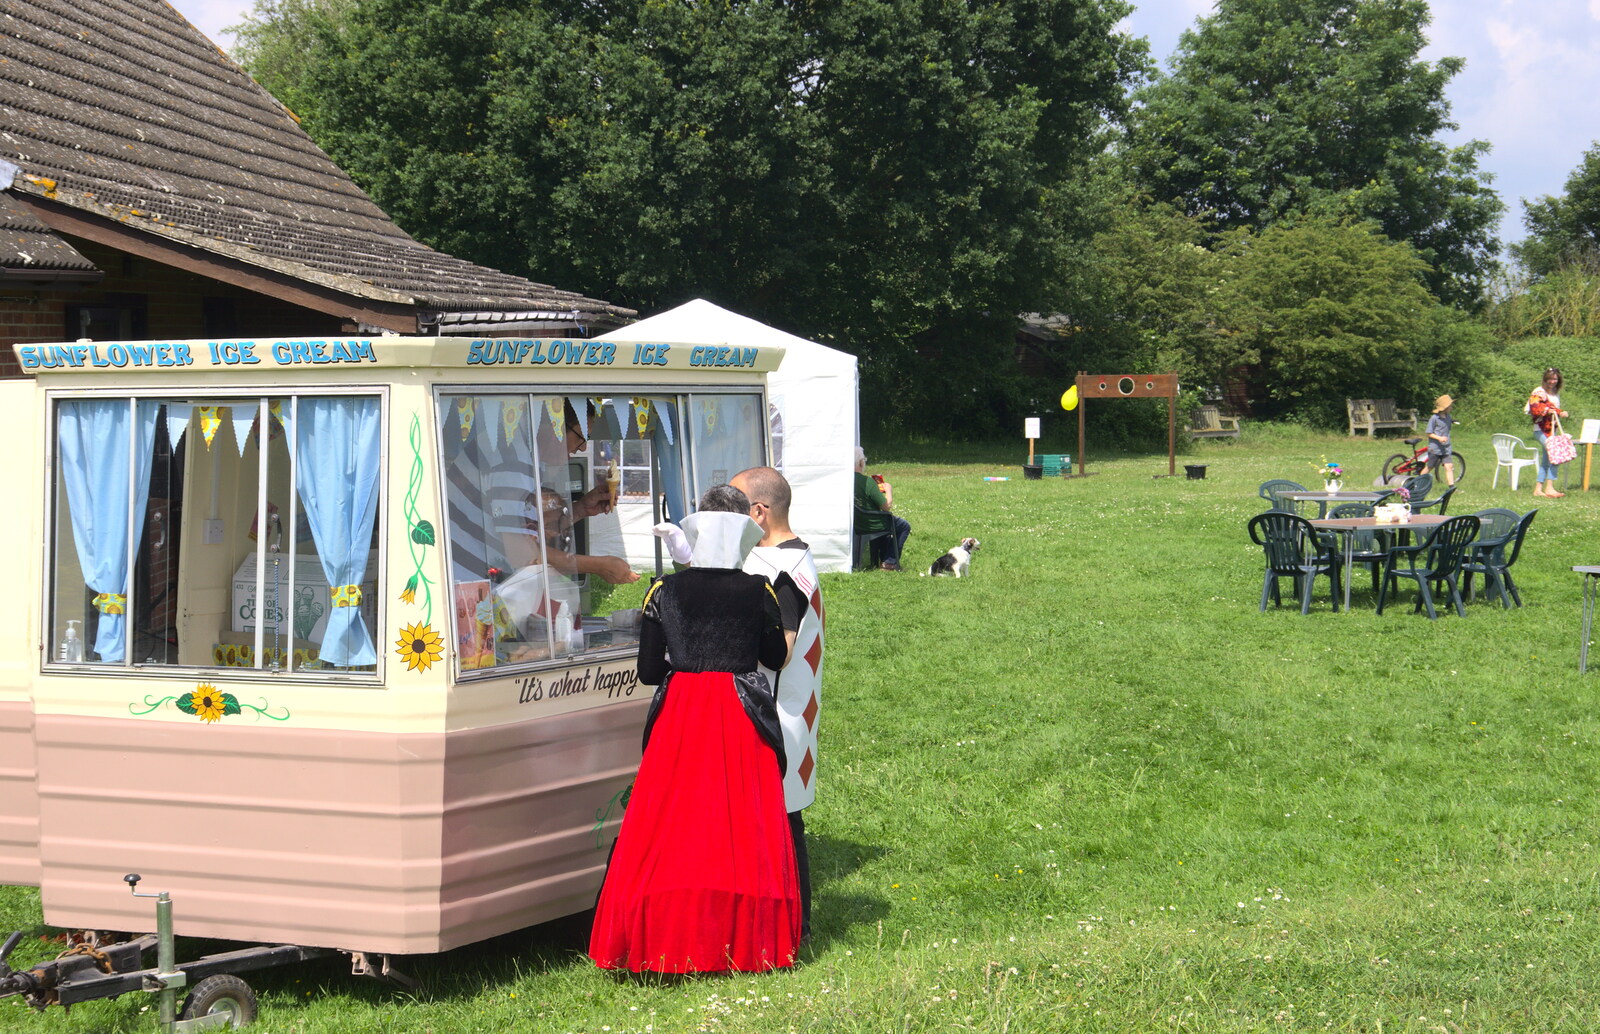 The Queen of Hearts gets an ice cream from The Not-Opening of the Palgrave Playground, Palgrave, Suffolk - 3rd June 2018